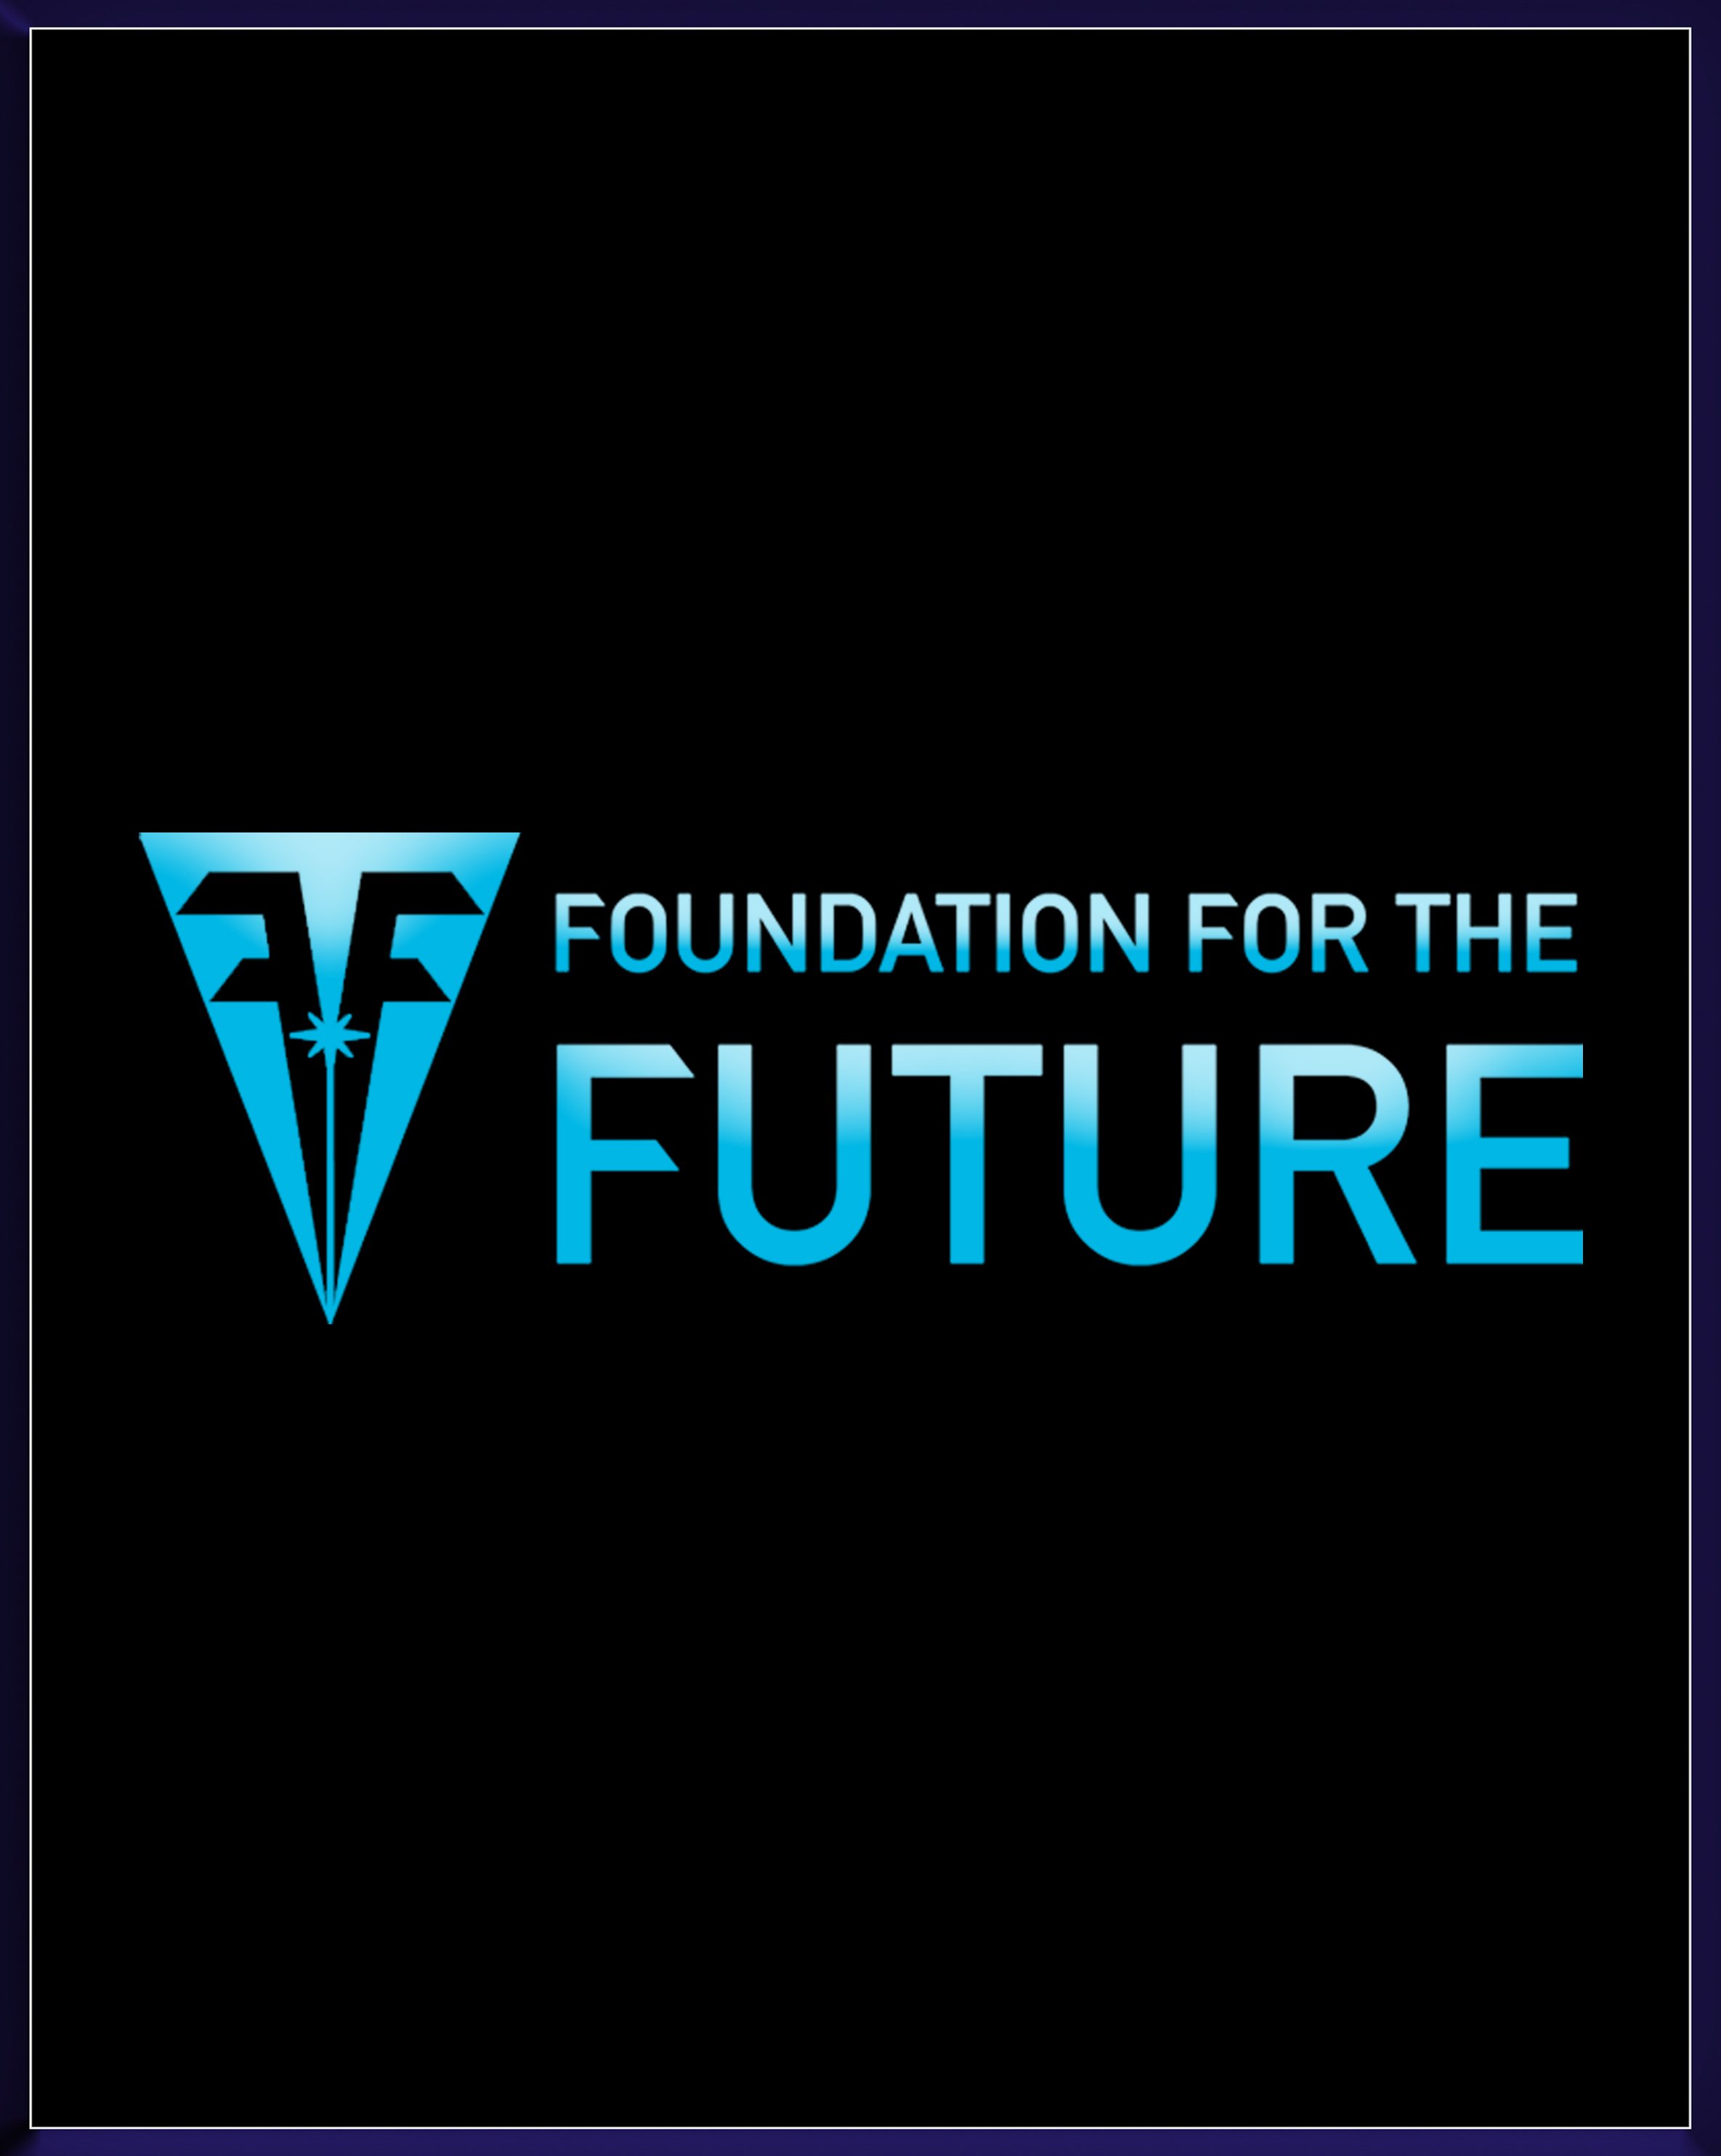 FOUNDATION FOR THE FUTURE